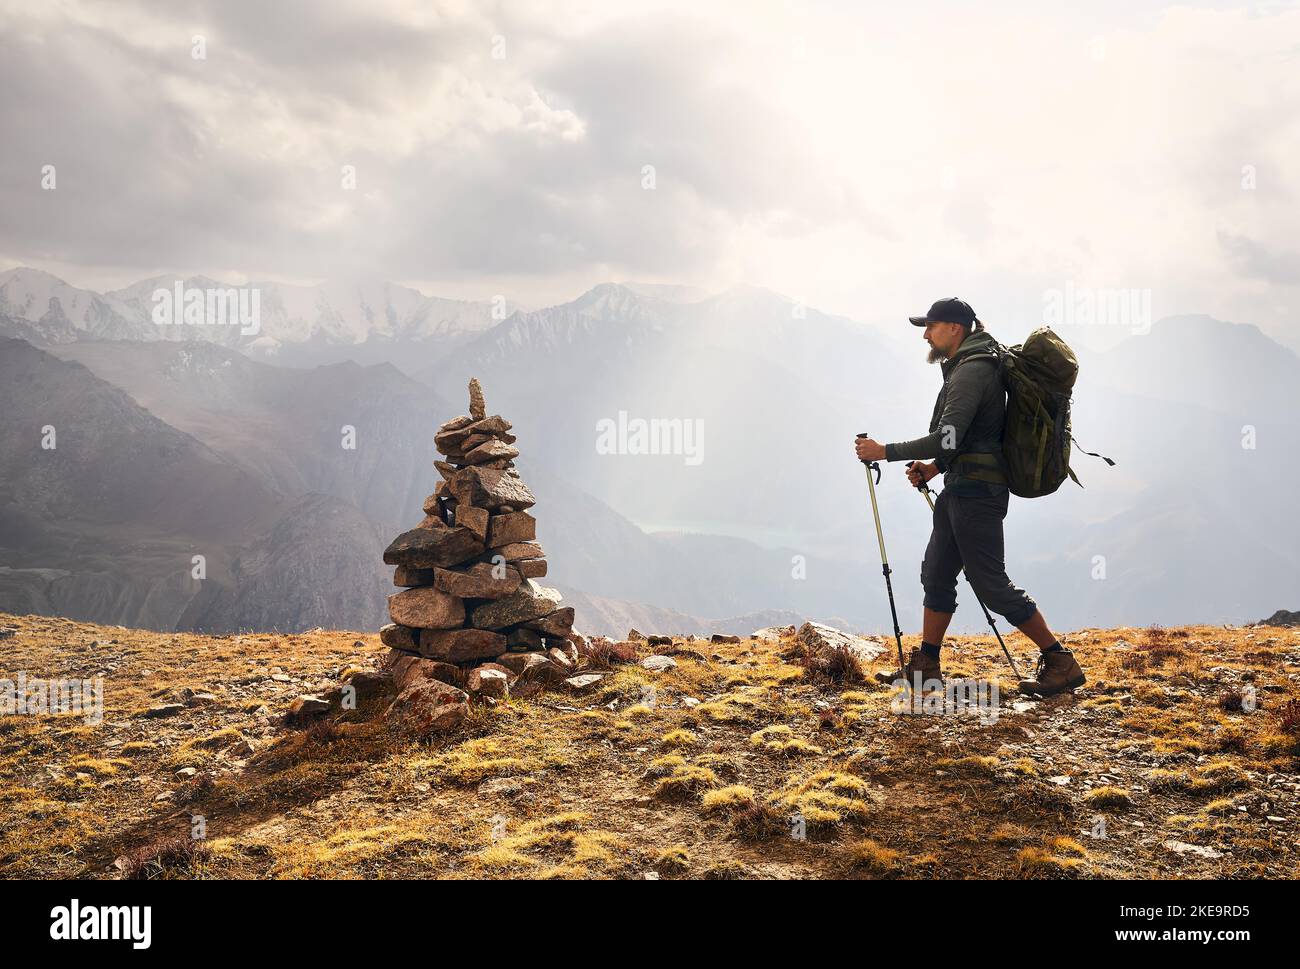 Man Hiker tourist with big backpack in silhouette on the hill against cloudy sky in the mountain valley. Outdoor and trekking concept. Stock Photo